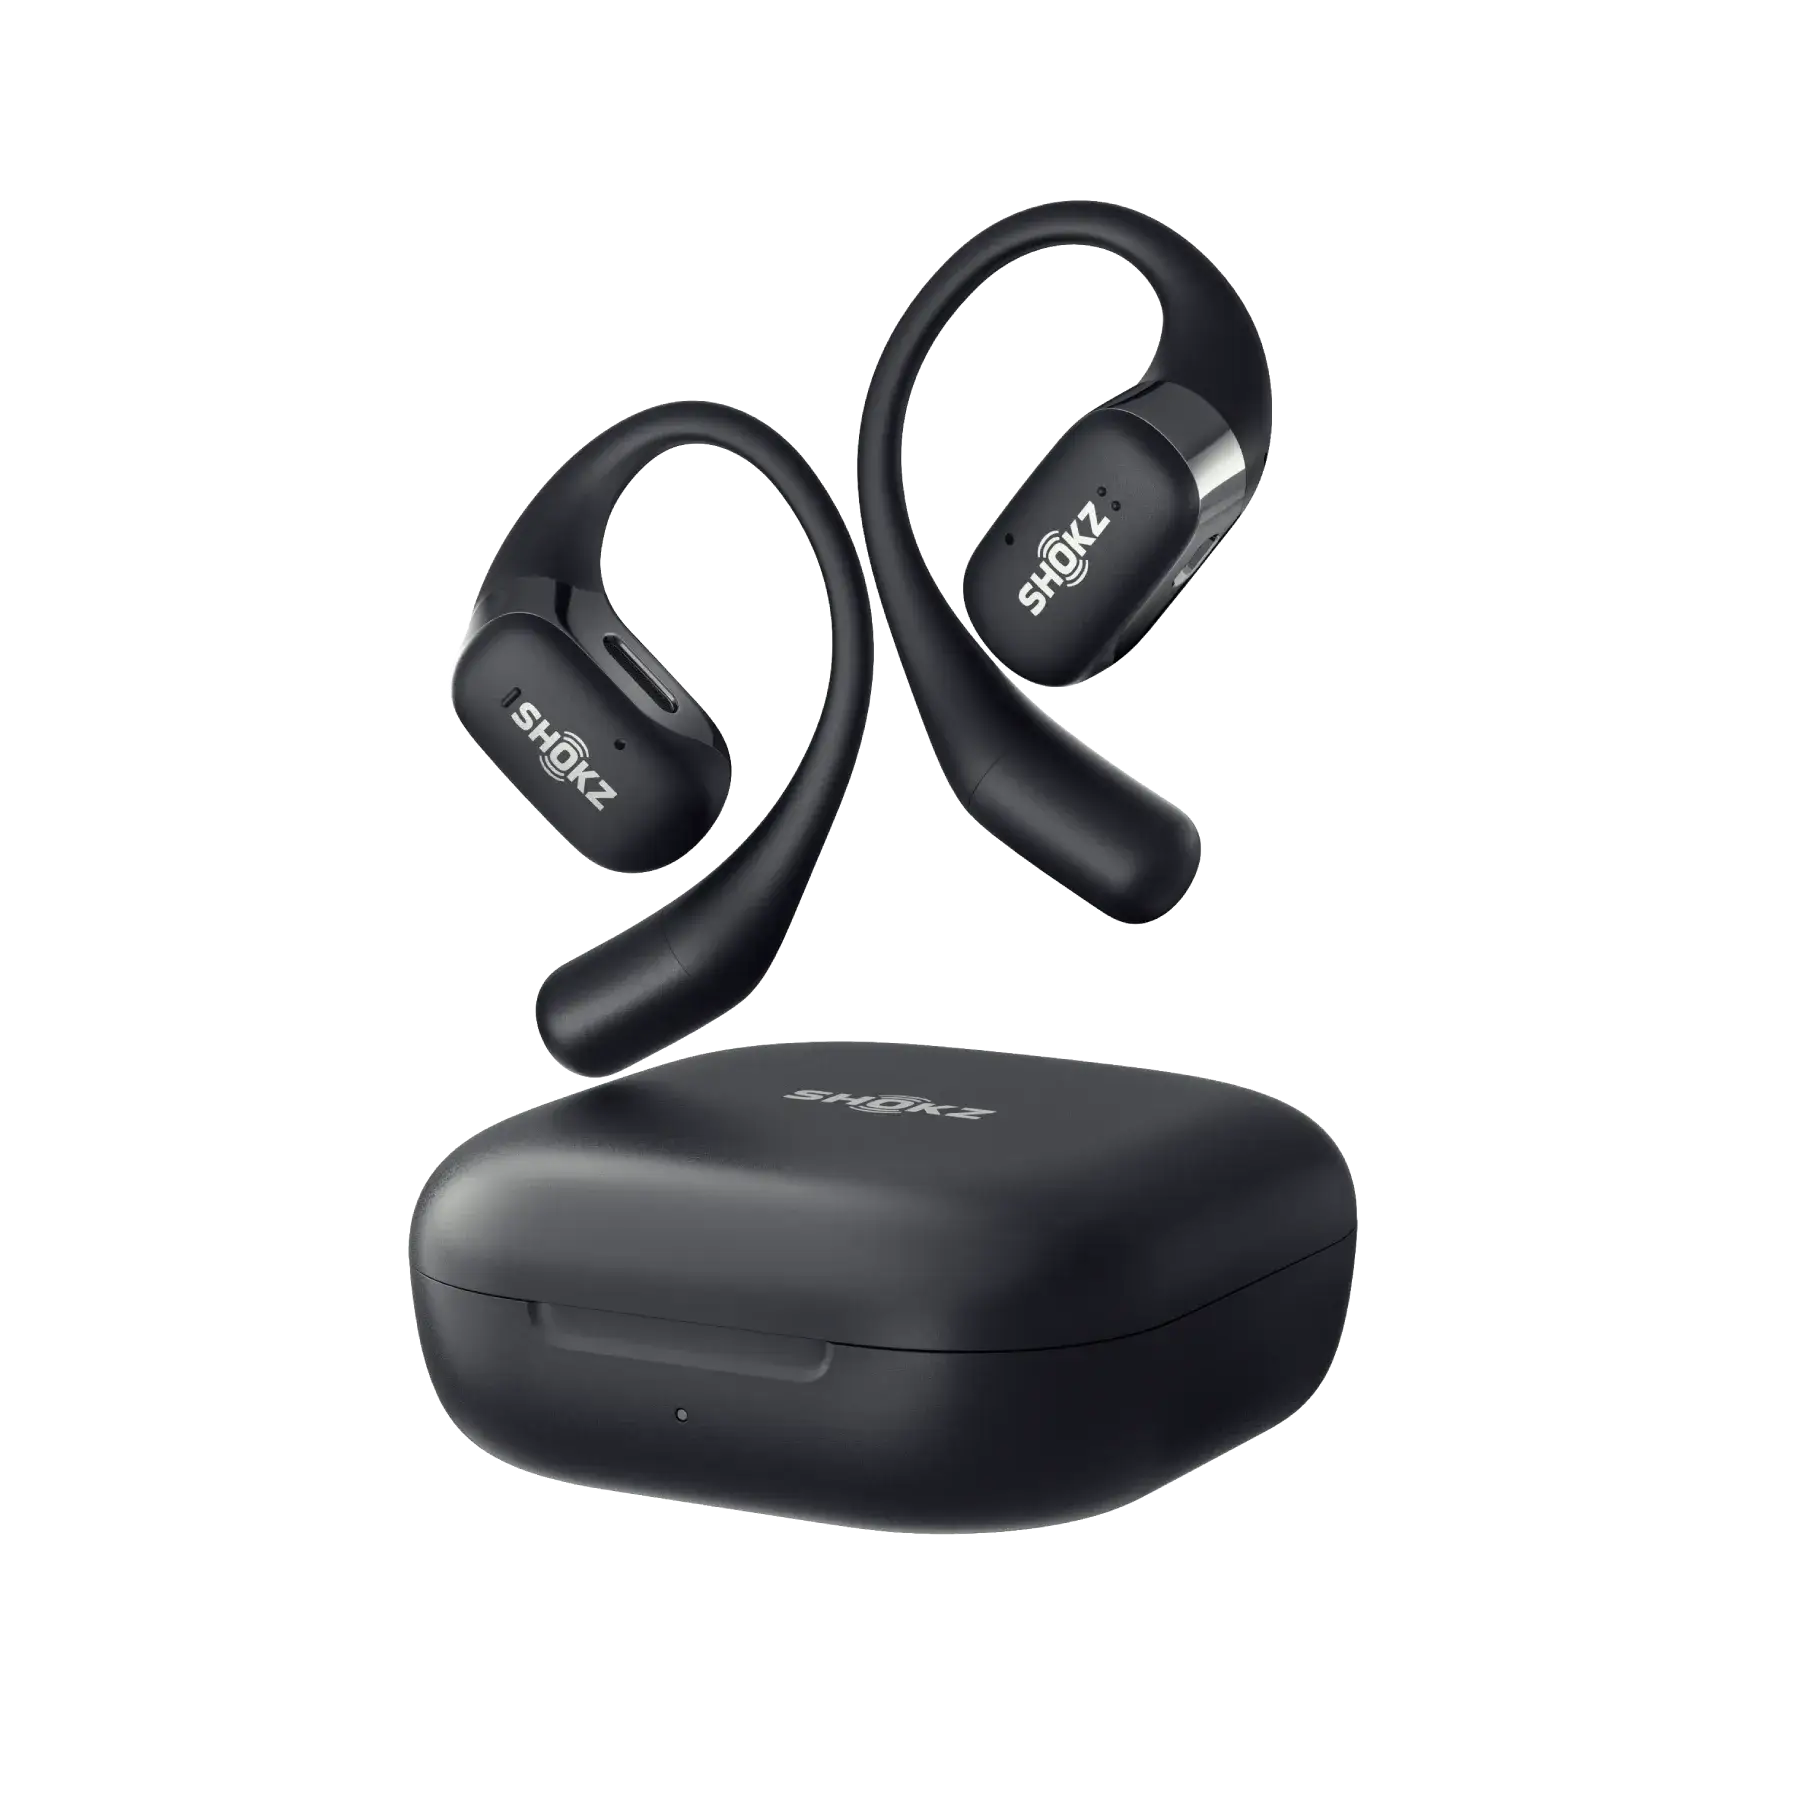 True wireless earbuds with fully adjustable ANC